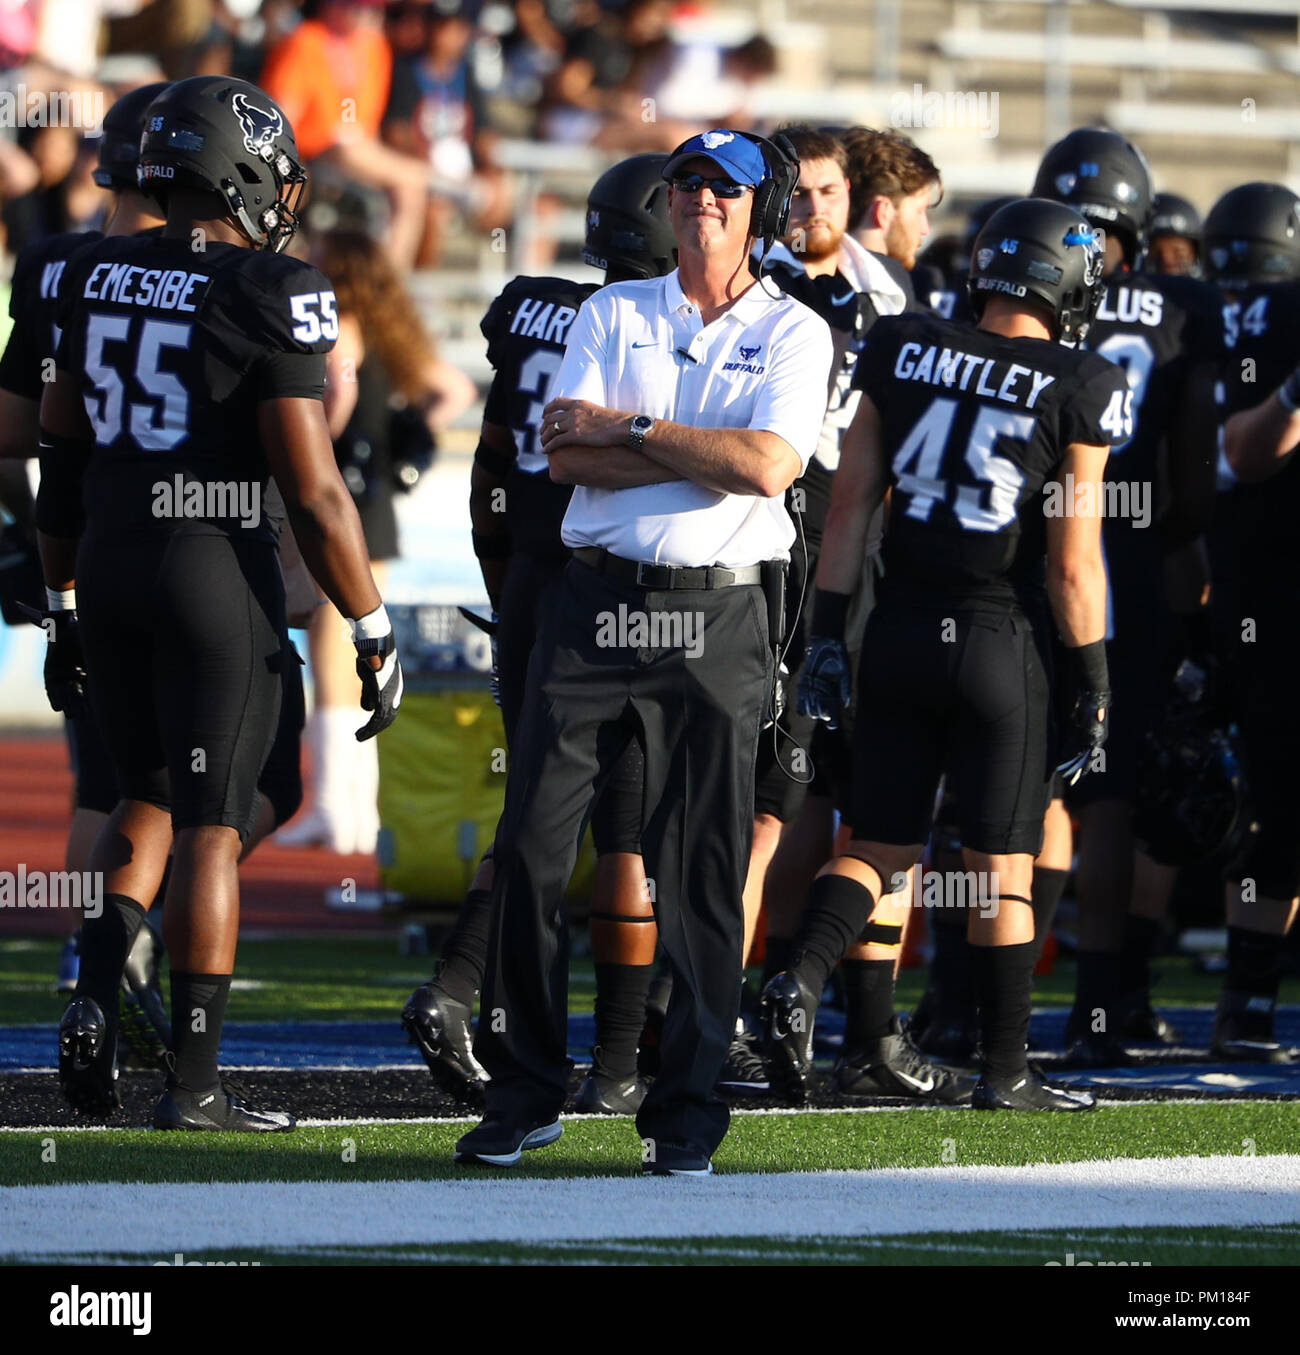 September 15, 2018:Buffalo Bulls head coach Lance Leipold during the first half of play in the NCAA football game between the Eastern Michigan Eagles and Buffalo Bulls at UB Stadium in Amherst, N.Y. Buffalo defeated Eastern Michigan 35-28 to improve their record to 3-0 for the first time as an FBS program. (Nicholas T. LoVerde/Cal Sport Media) Stock Photo